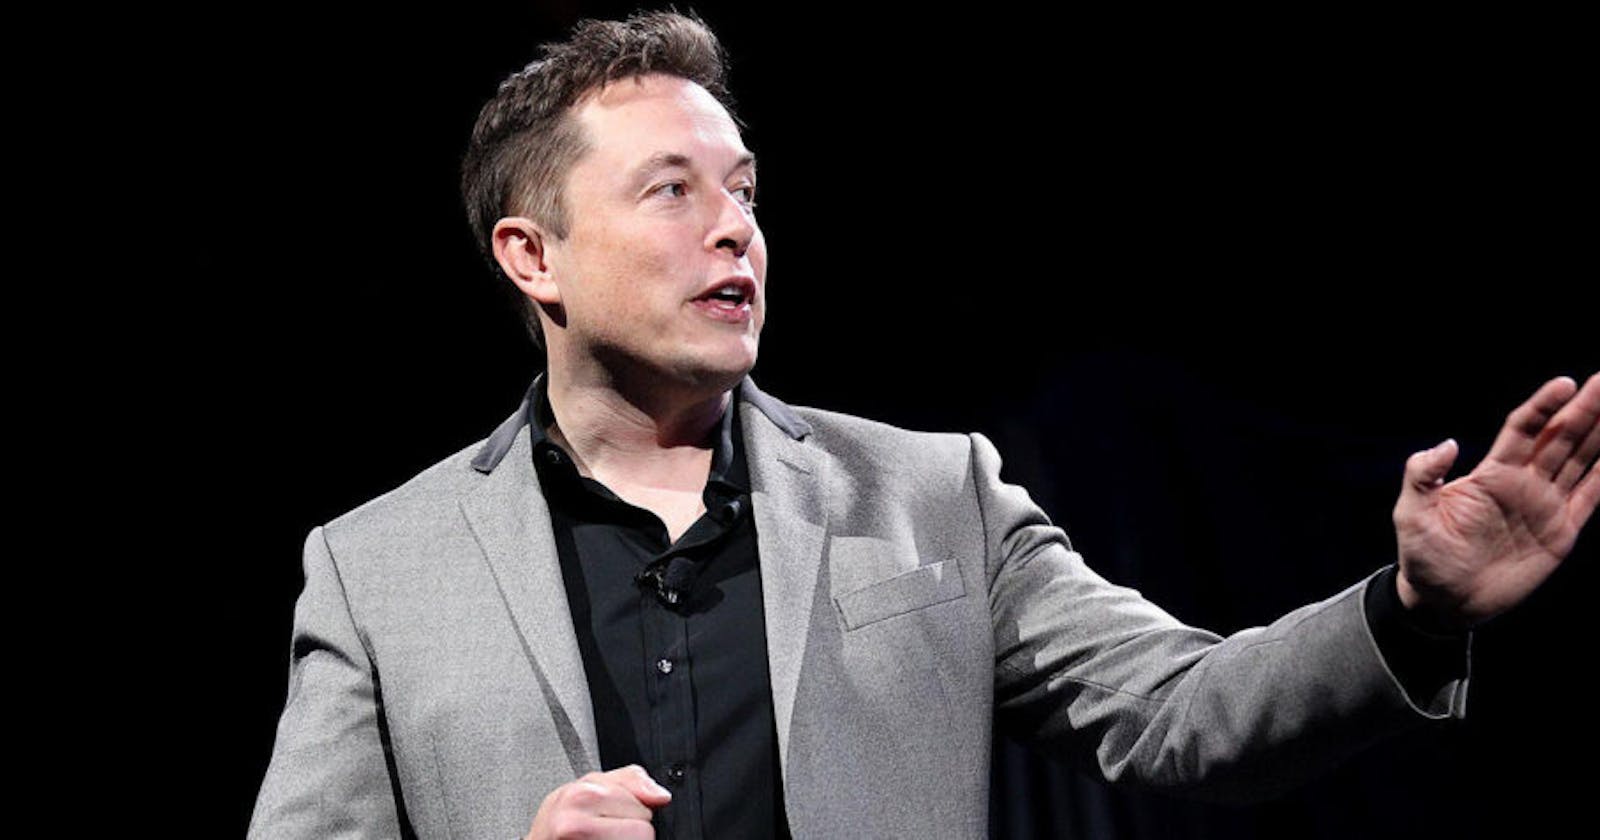 Elon Musk Is Fast Becoming The Steve Jobs Of Today